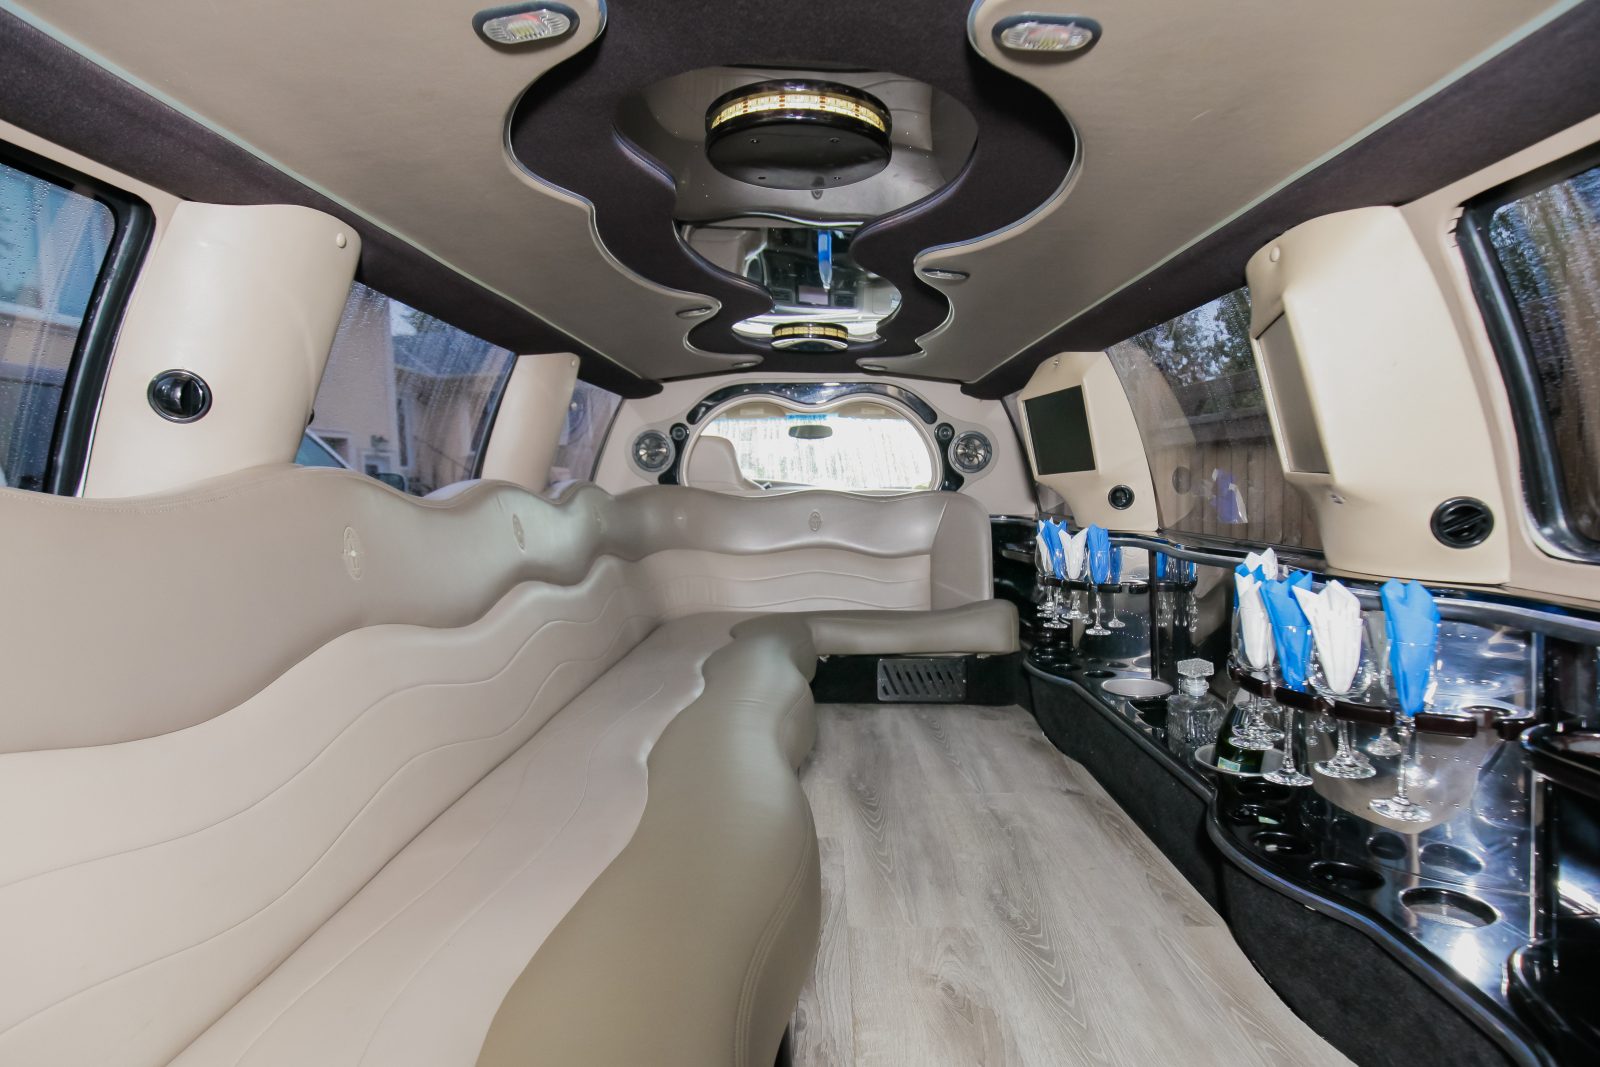 An image showing the inside of the Ford Excursion Stretch Limo